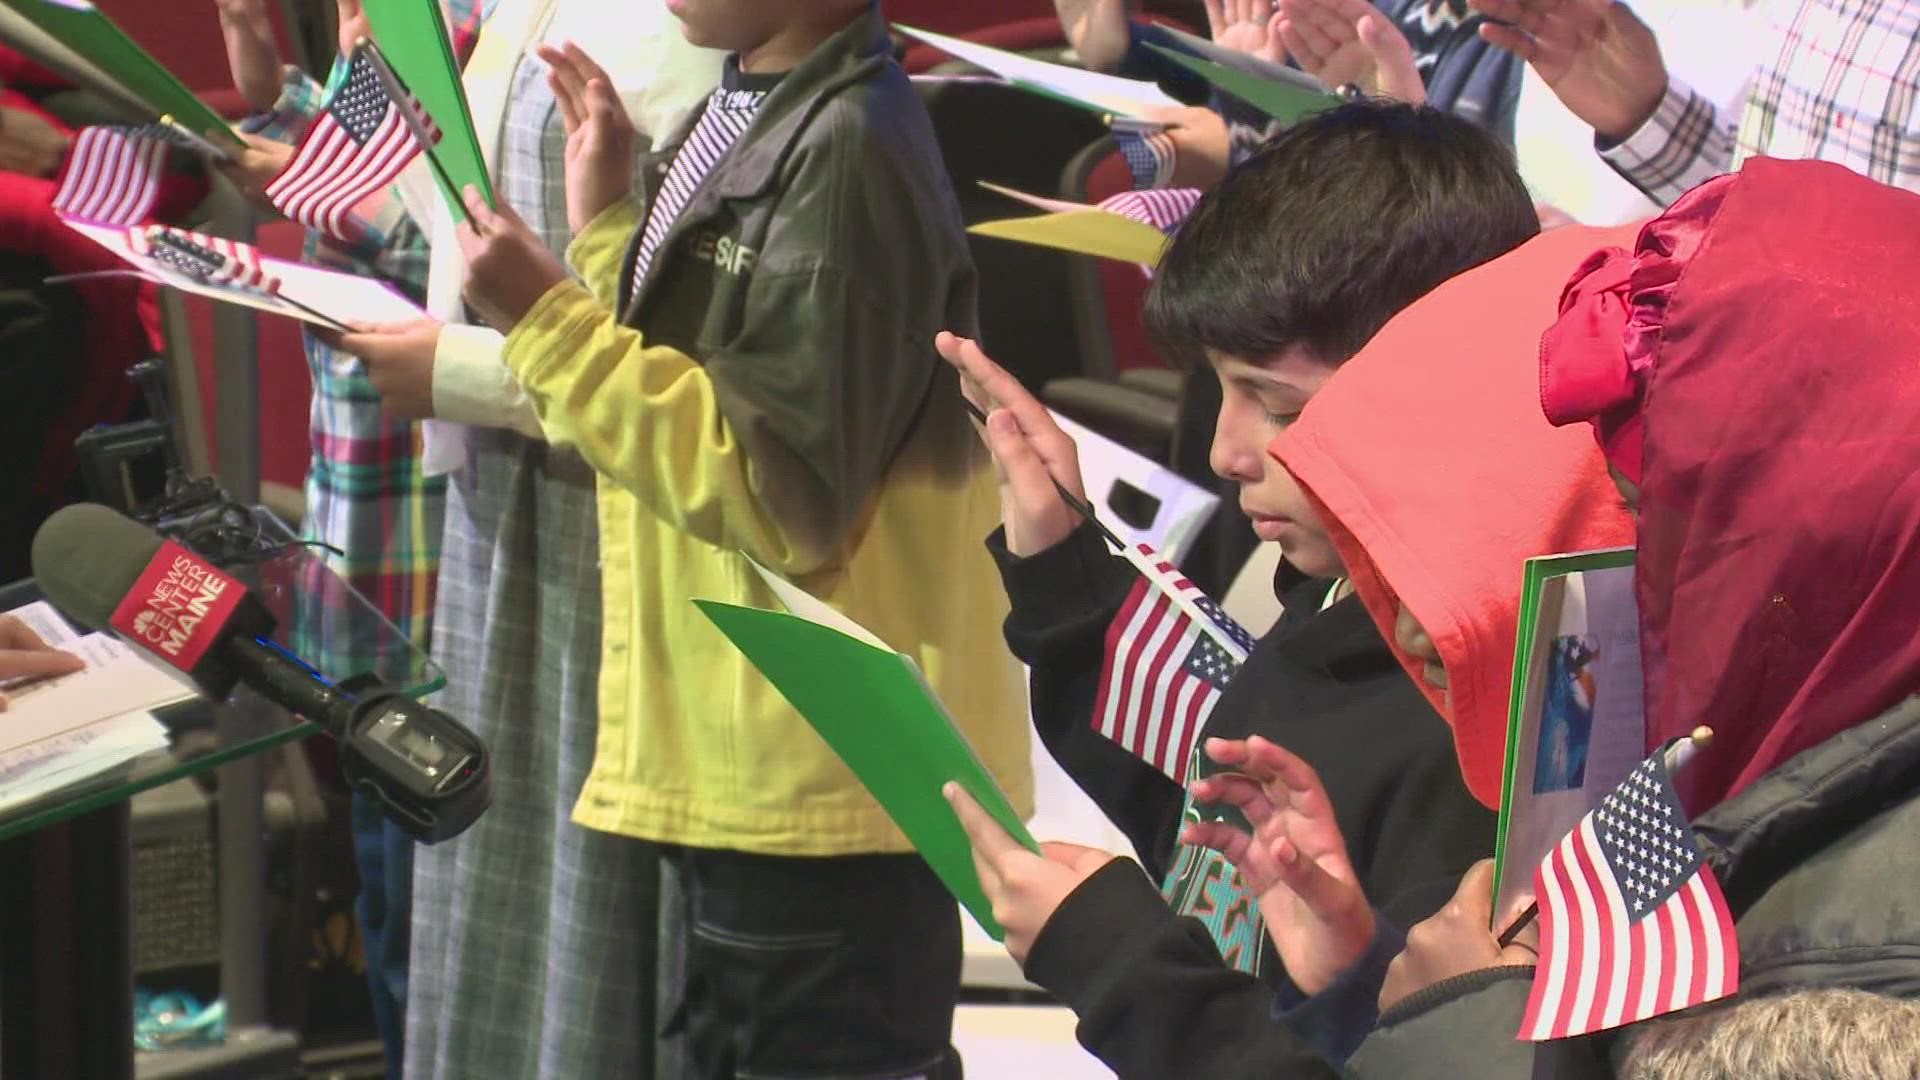 Two citizenship ceremonies were held at the Children's Museum & Theatre of Maine in Portland.